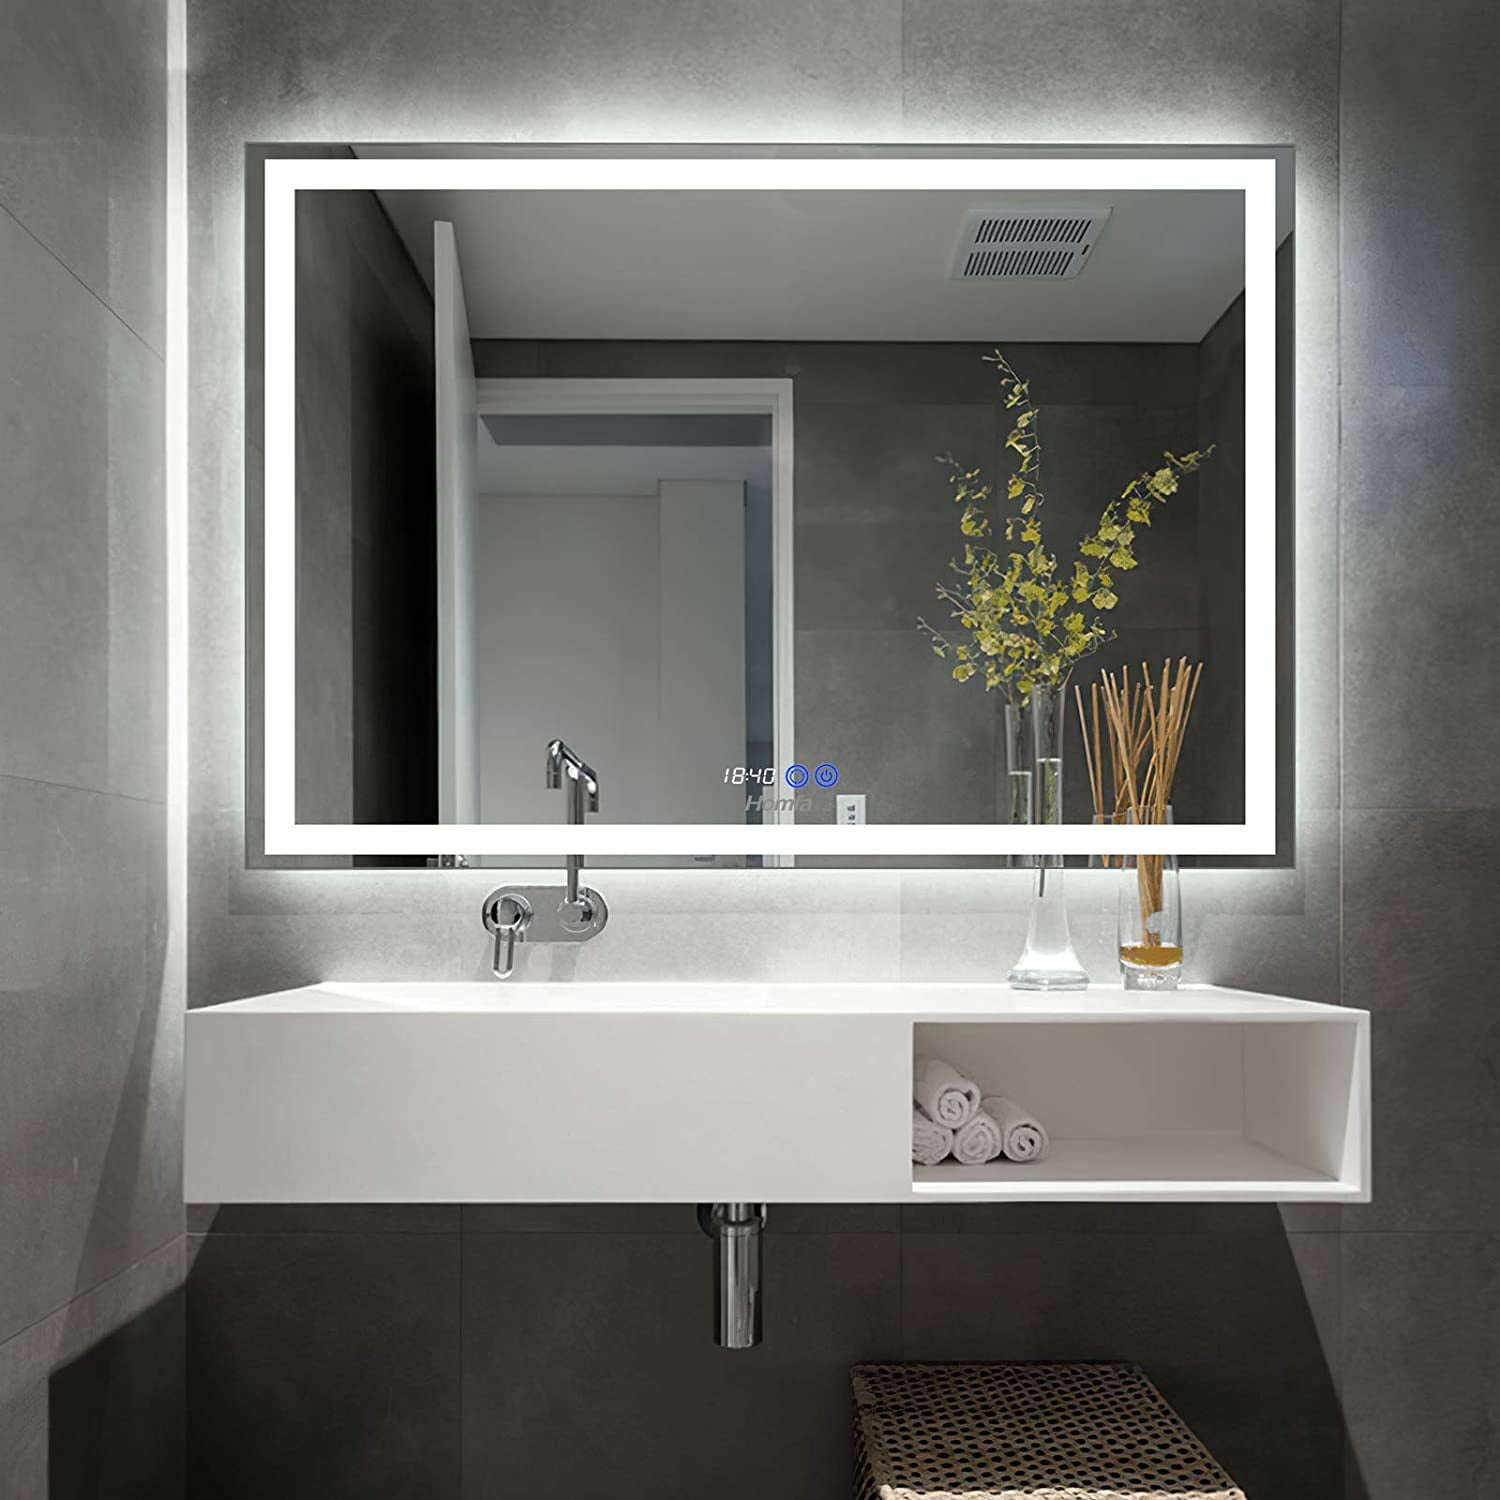 32x24 Inch LED Bathroom Mirror with Lights Dimmable IP44 Waterproof Lighted Bathroom Vanity Mirror 3 Color Temperature for Makeup Dutsekk LED Mirror for Bathroom 